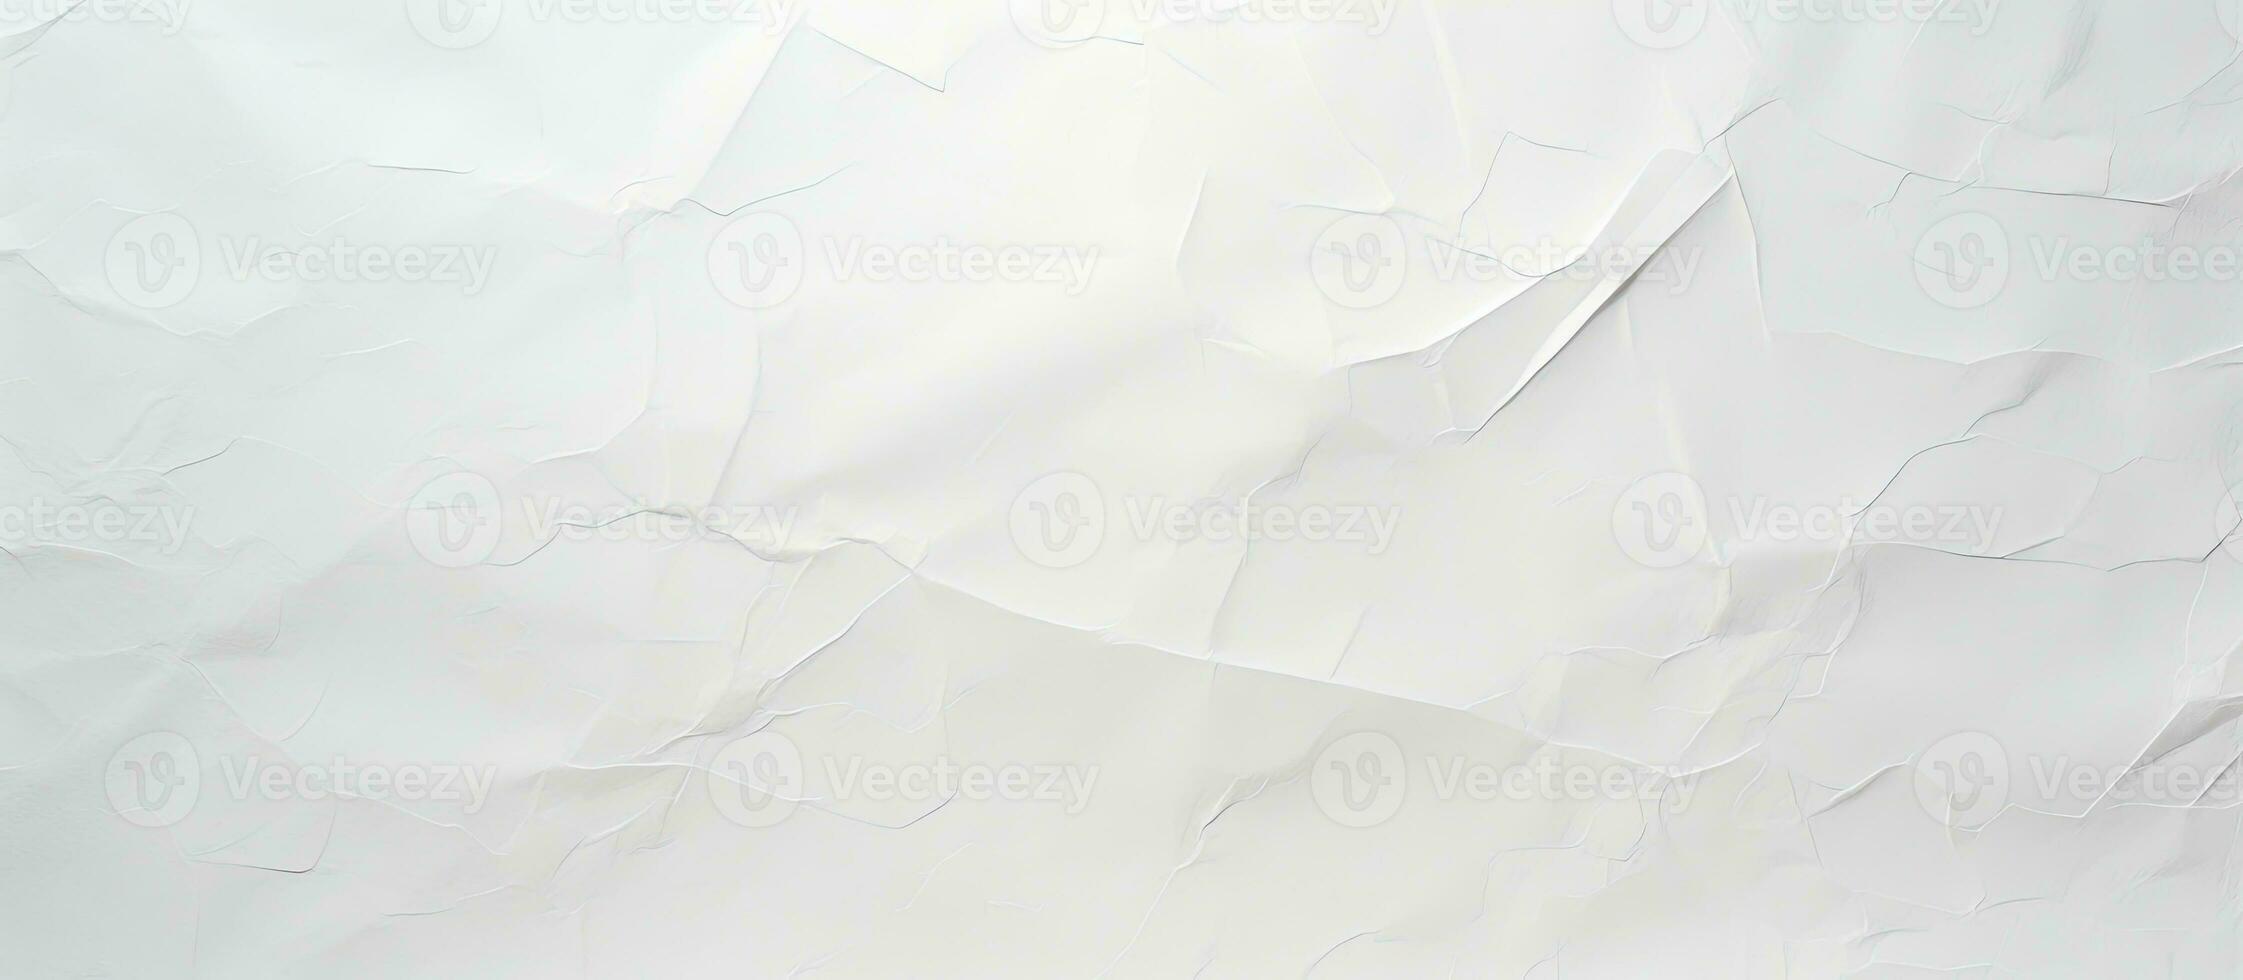 Light texture white paper background suitable for scrapbooking photo